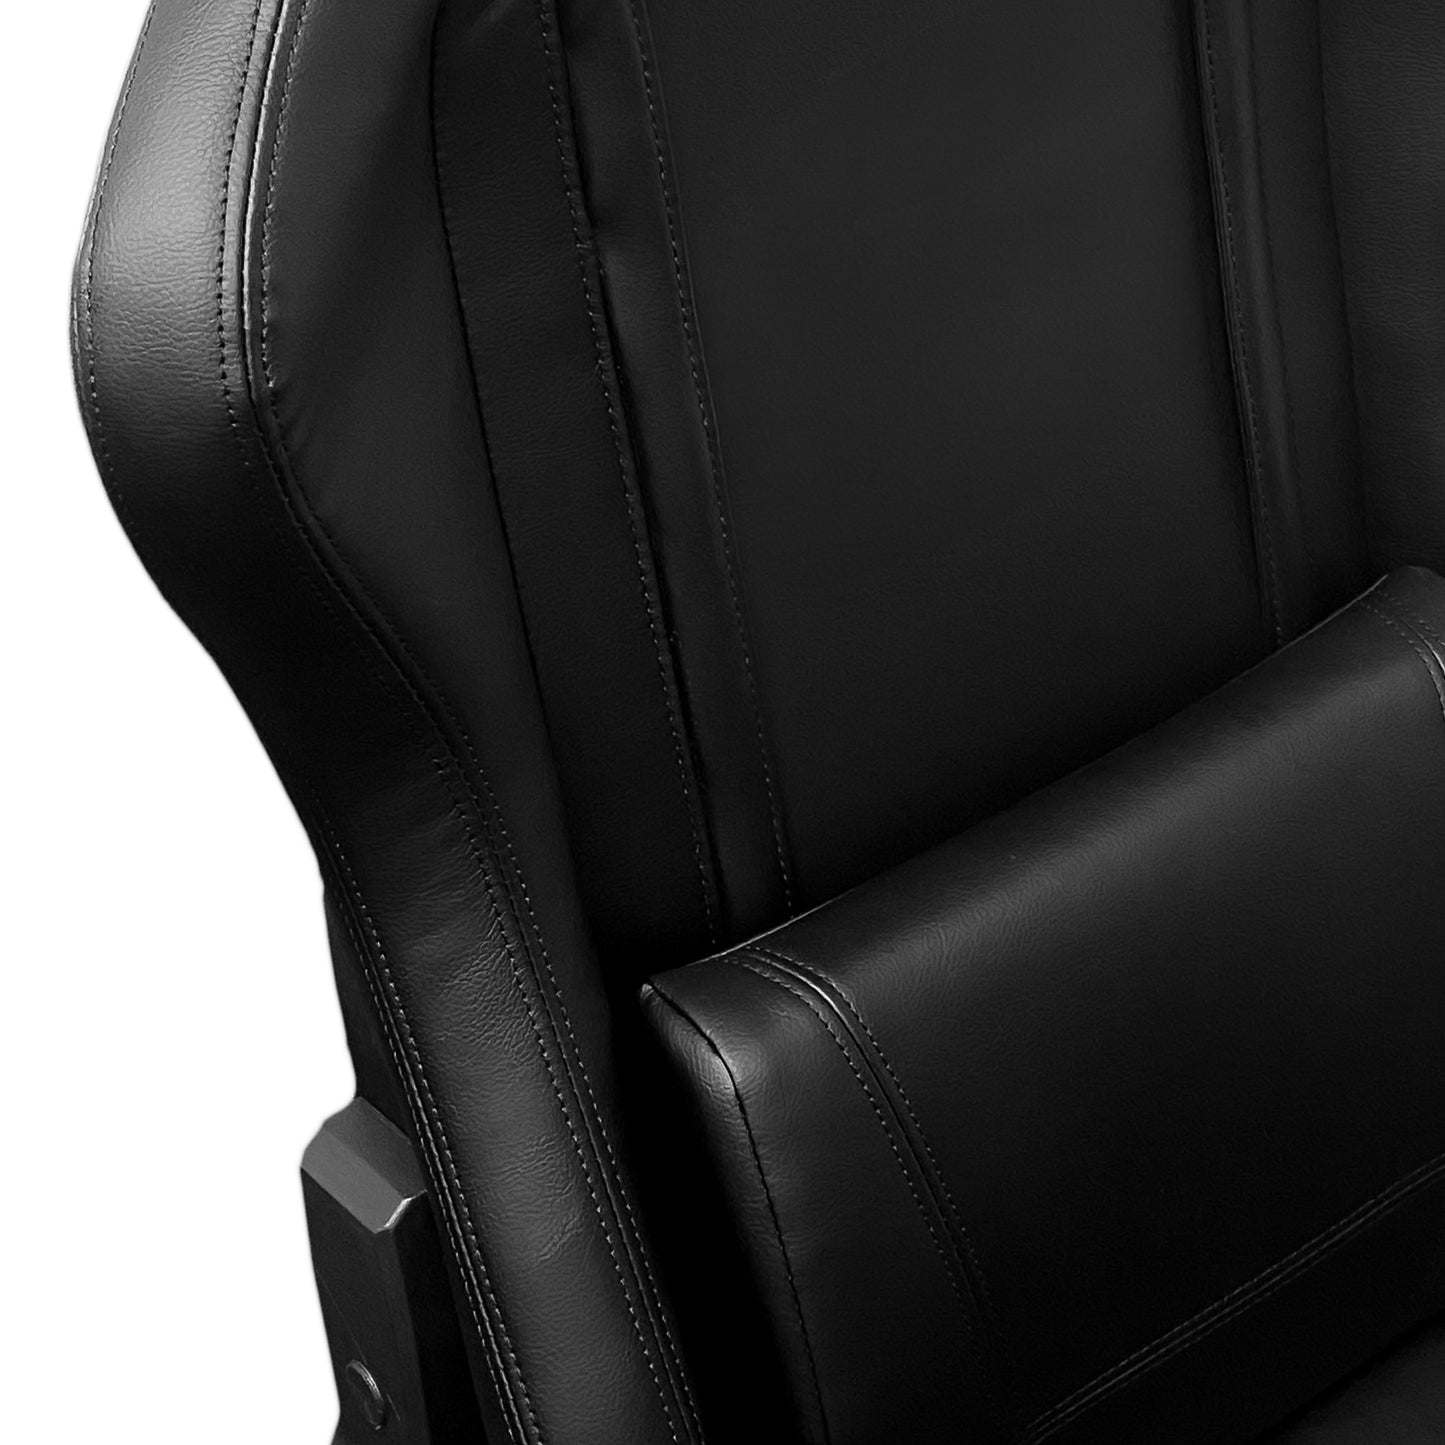 Xpression Pro Gaming Chair with Nevada Primary Logo